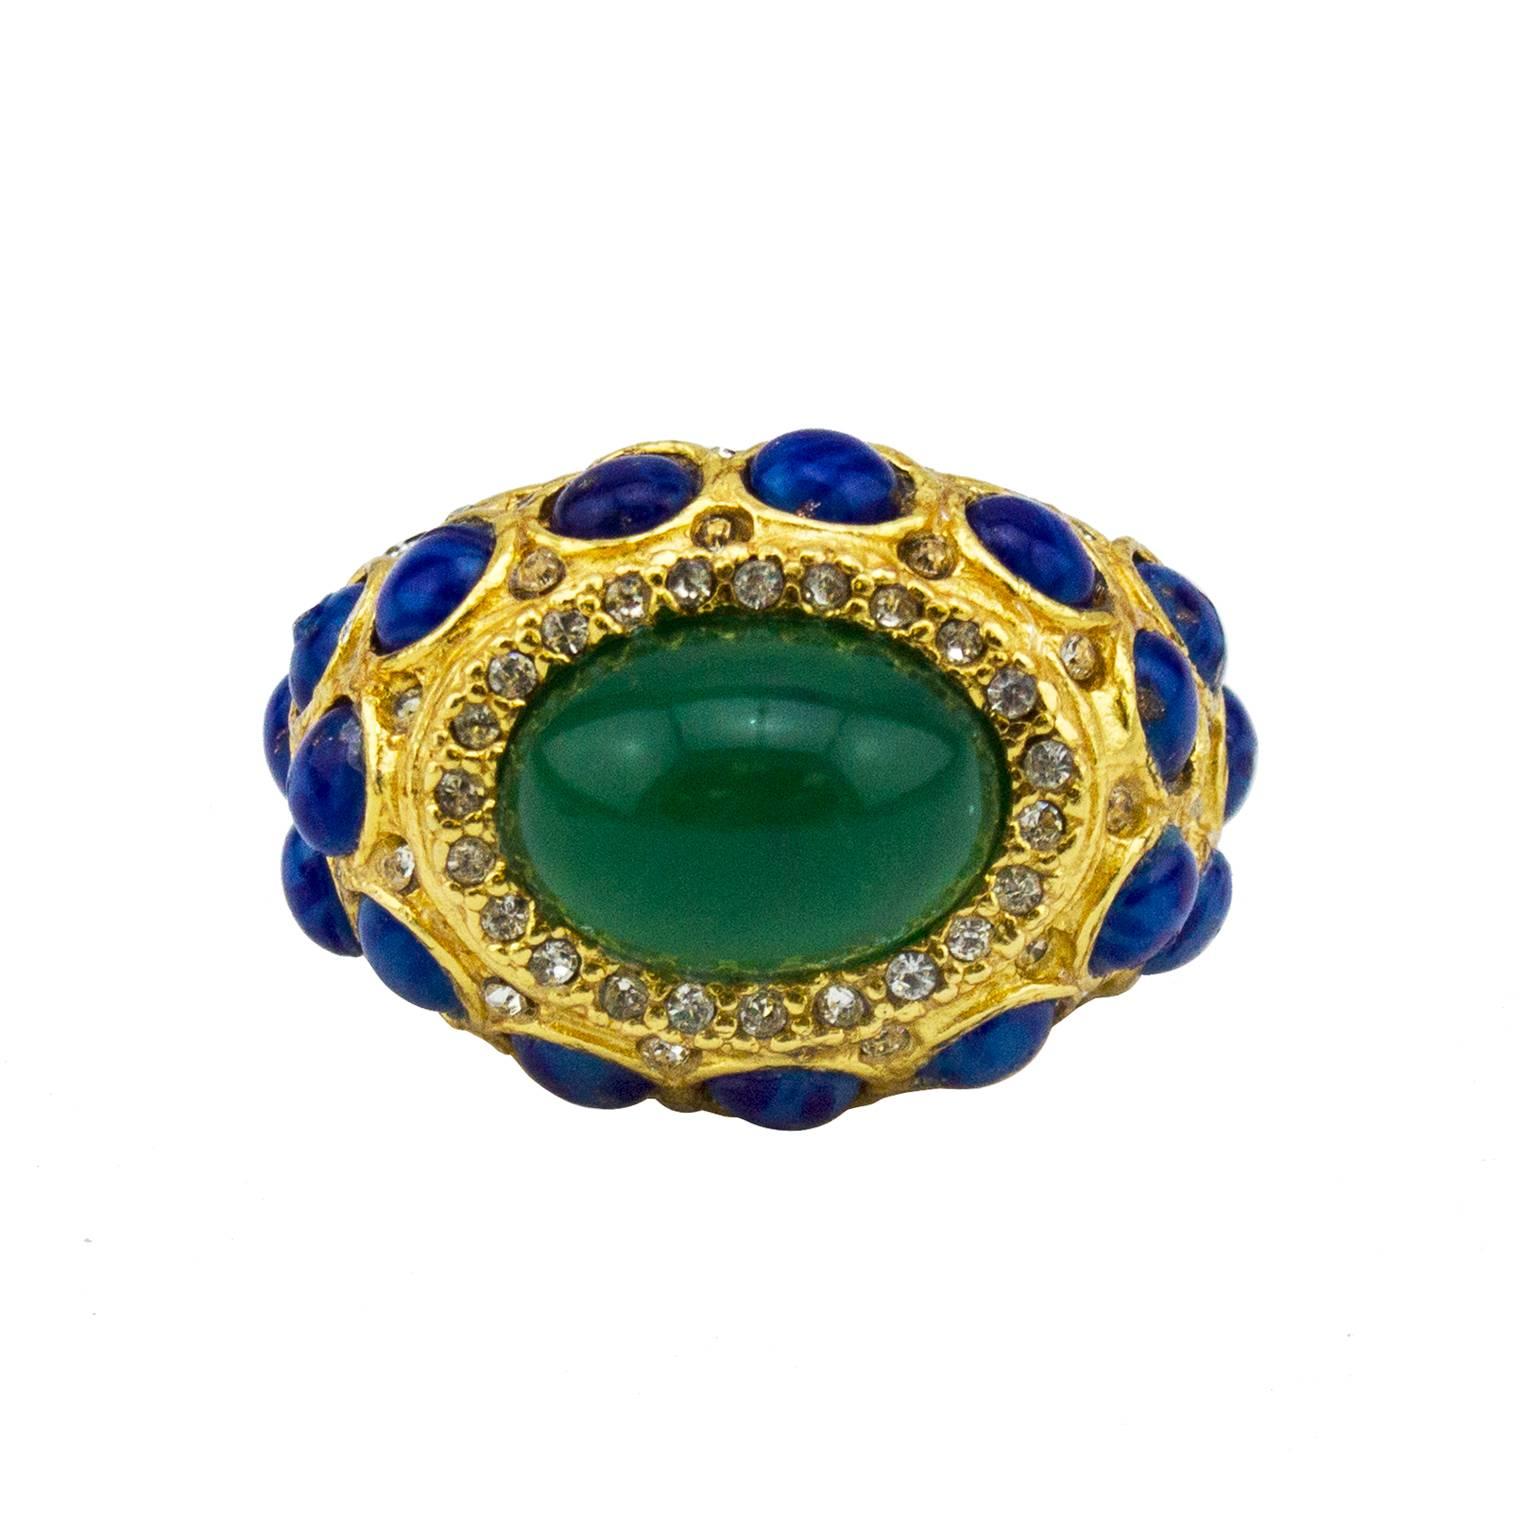 Stunning 1970s Kenneth Jay Lane cocktail ring. Gold tone metal embellished with tiny rhinestones and cobalt blue stones. One large emerald green stone featured in centre with more tiny rhinestones around the perimeter. K.J.L plaque on interior.